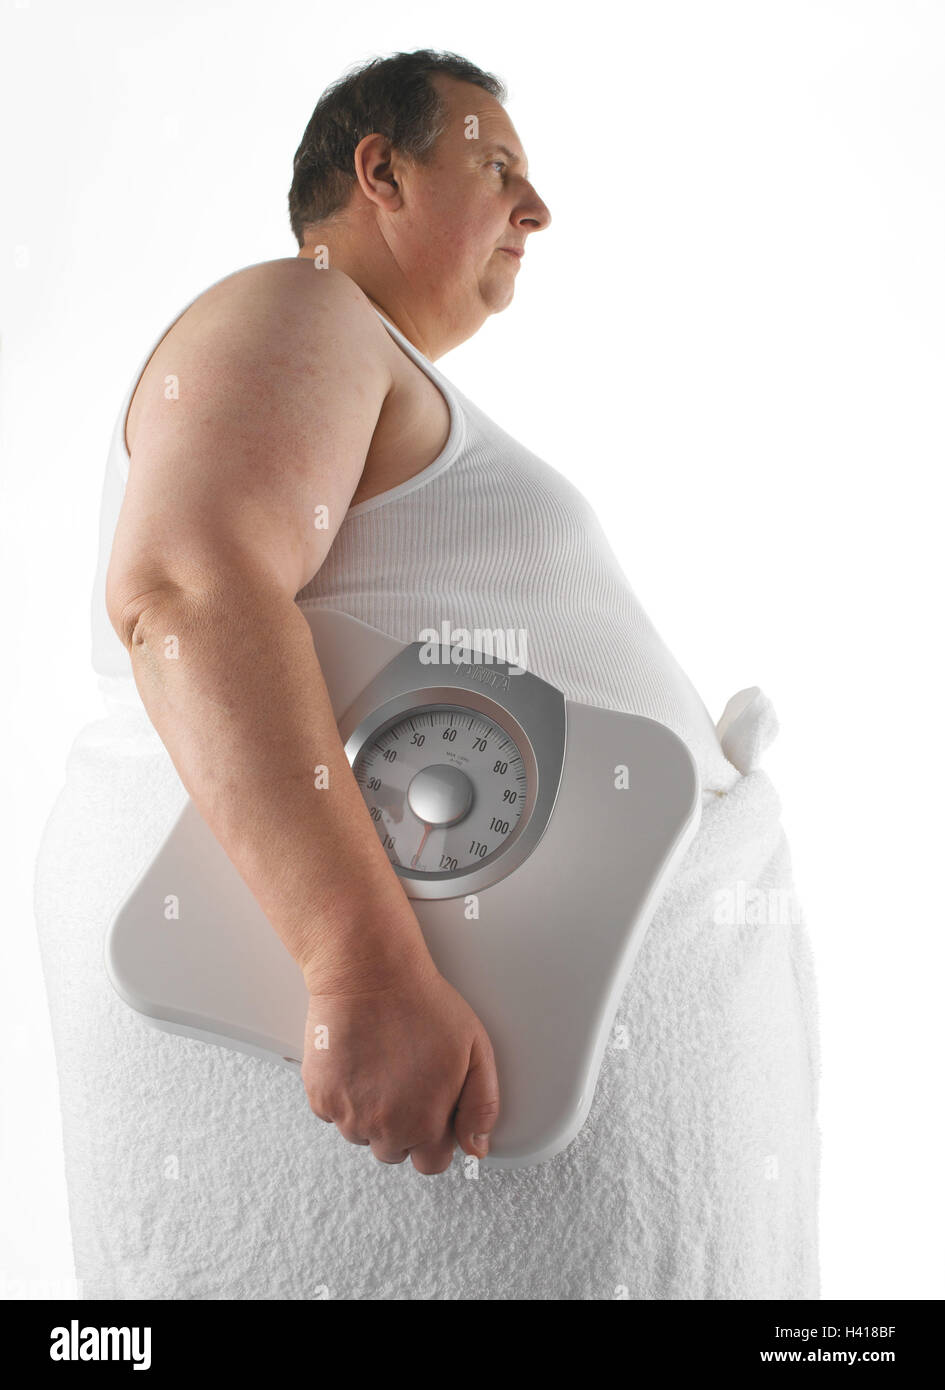 Man, stand overweight, vest, bath towel, body scales, side view, middle old person, thickly, bold, overweight, adiposity, obesity, fatly, obesity, preview, seriously, towel, scales, bathroom scales, carry, body perimetre, weight controls, body weight, wei Stock Photo